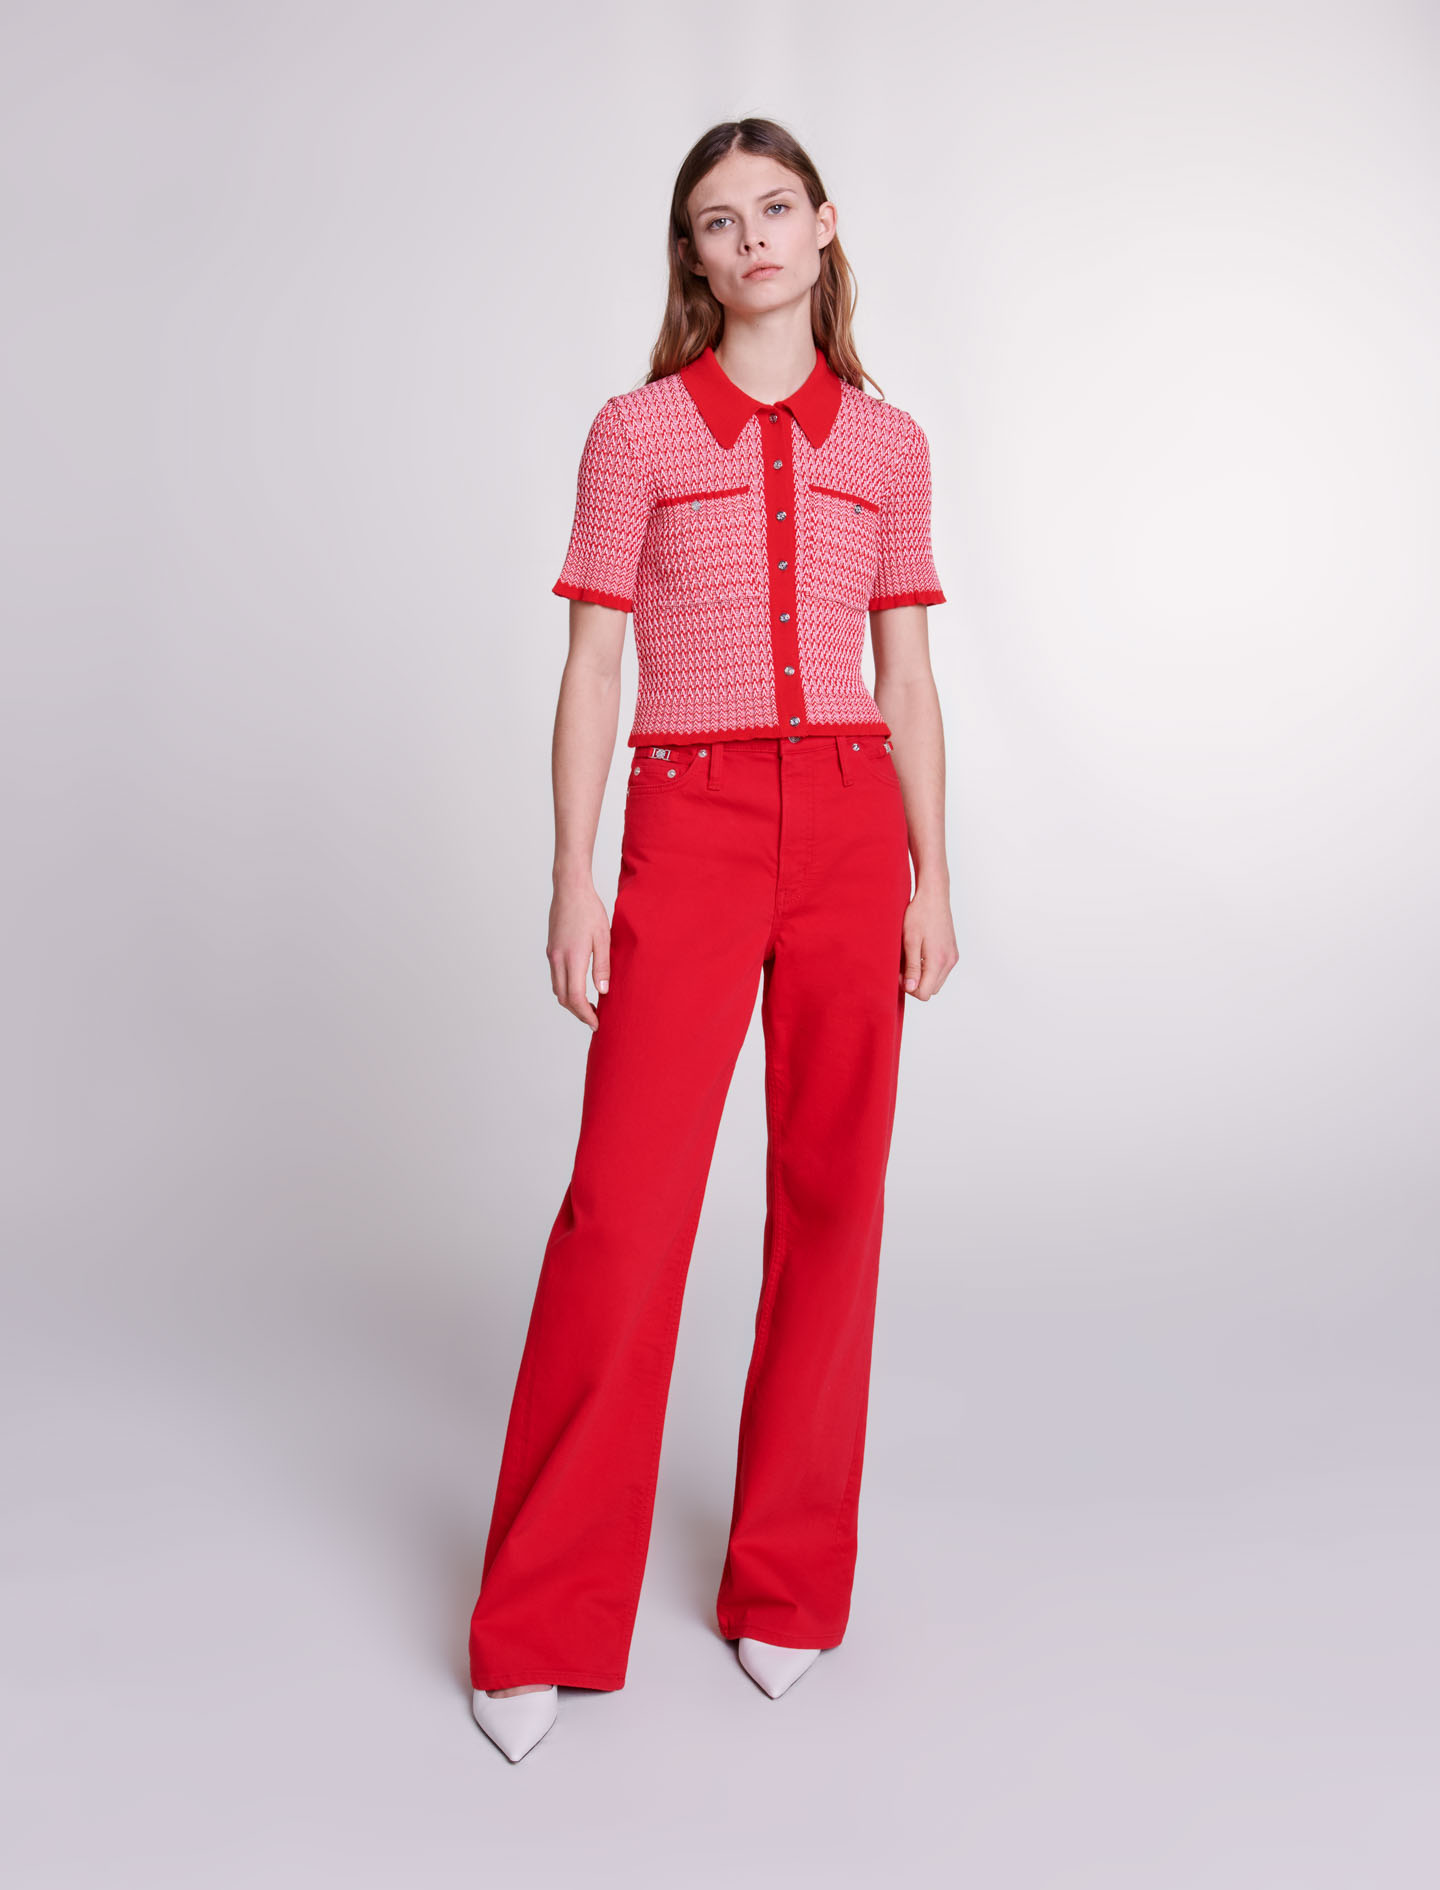 Maje Woman's viscose, Cropped herringbone polo shirt for Spring/Summer, in color Red / Red